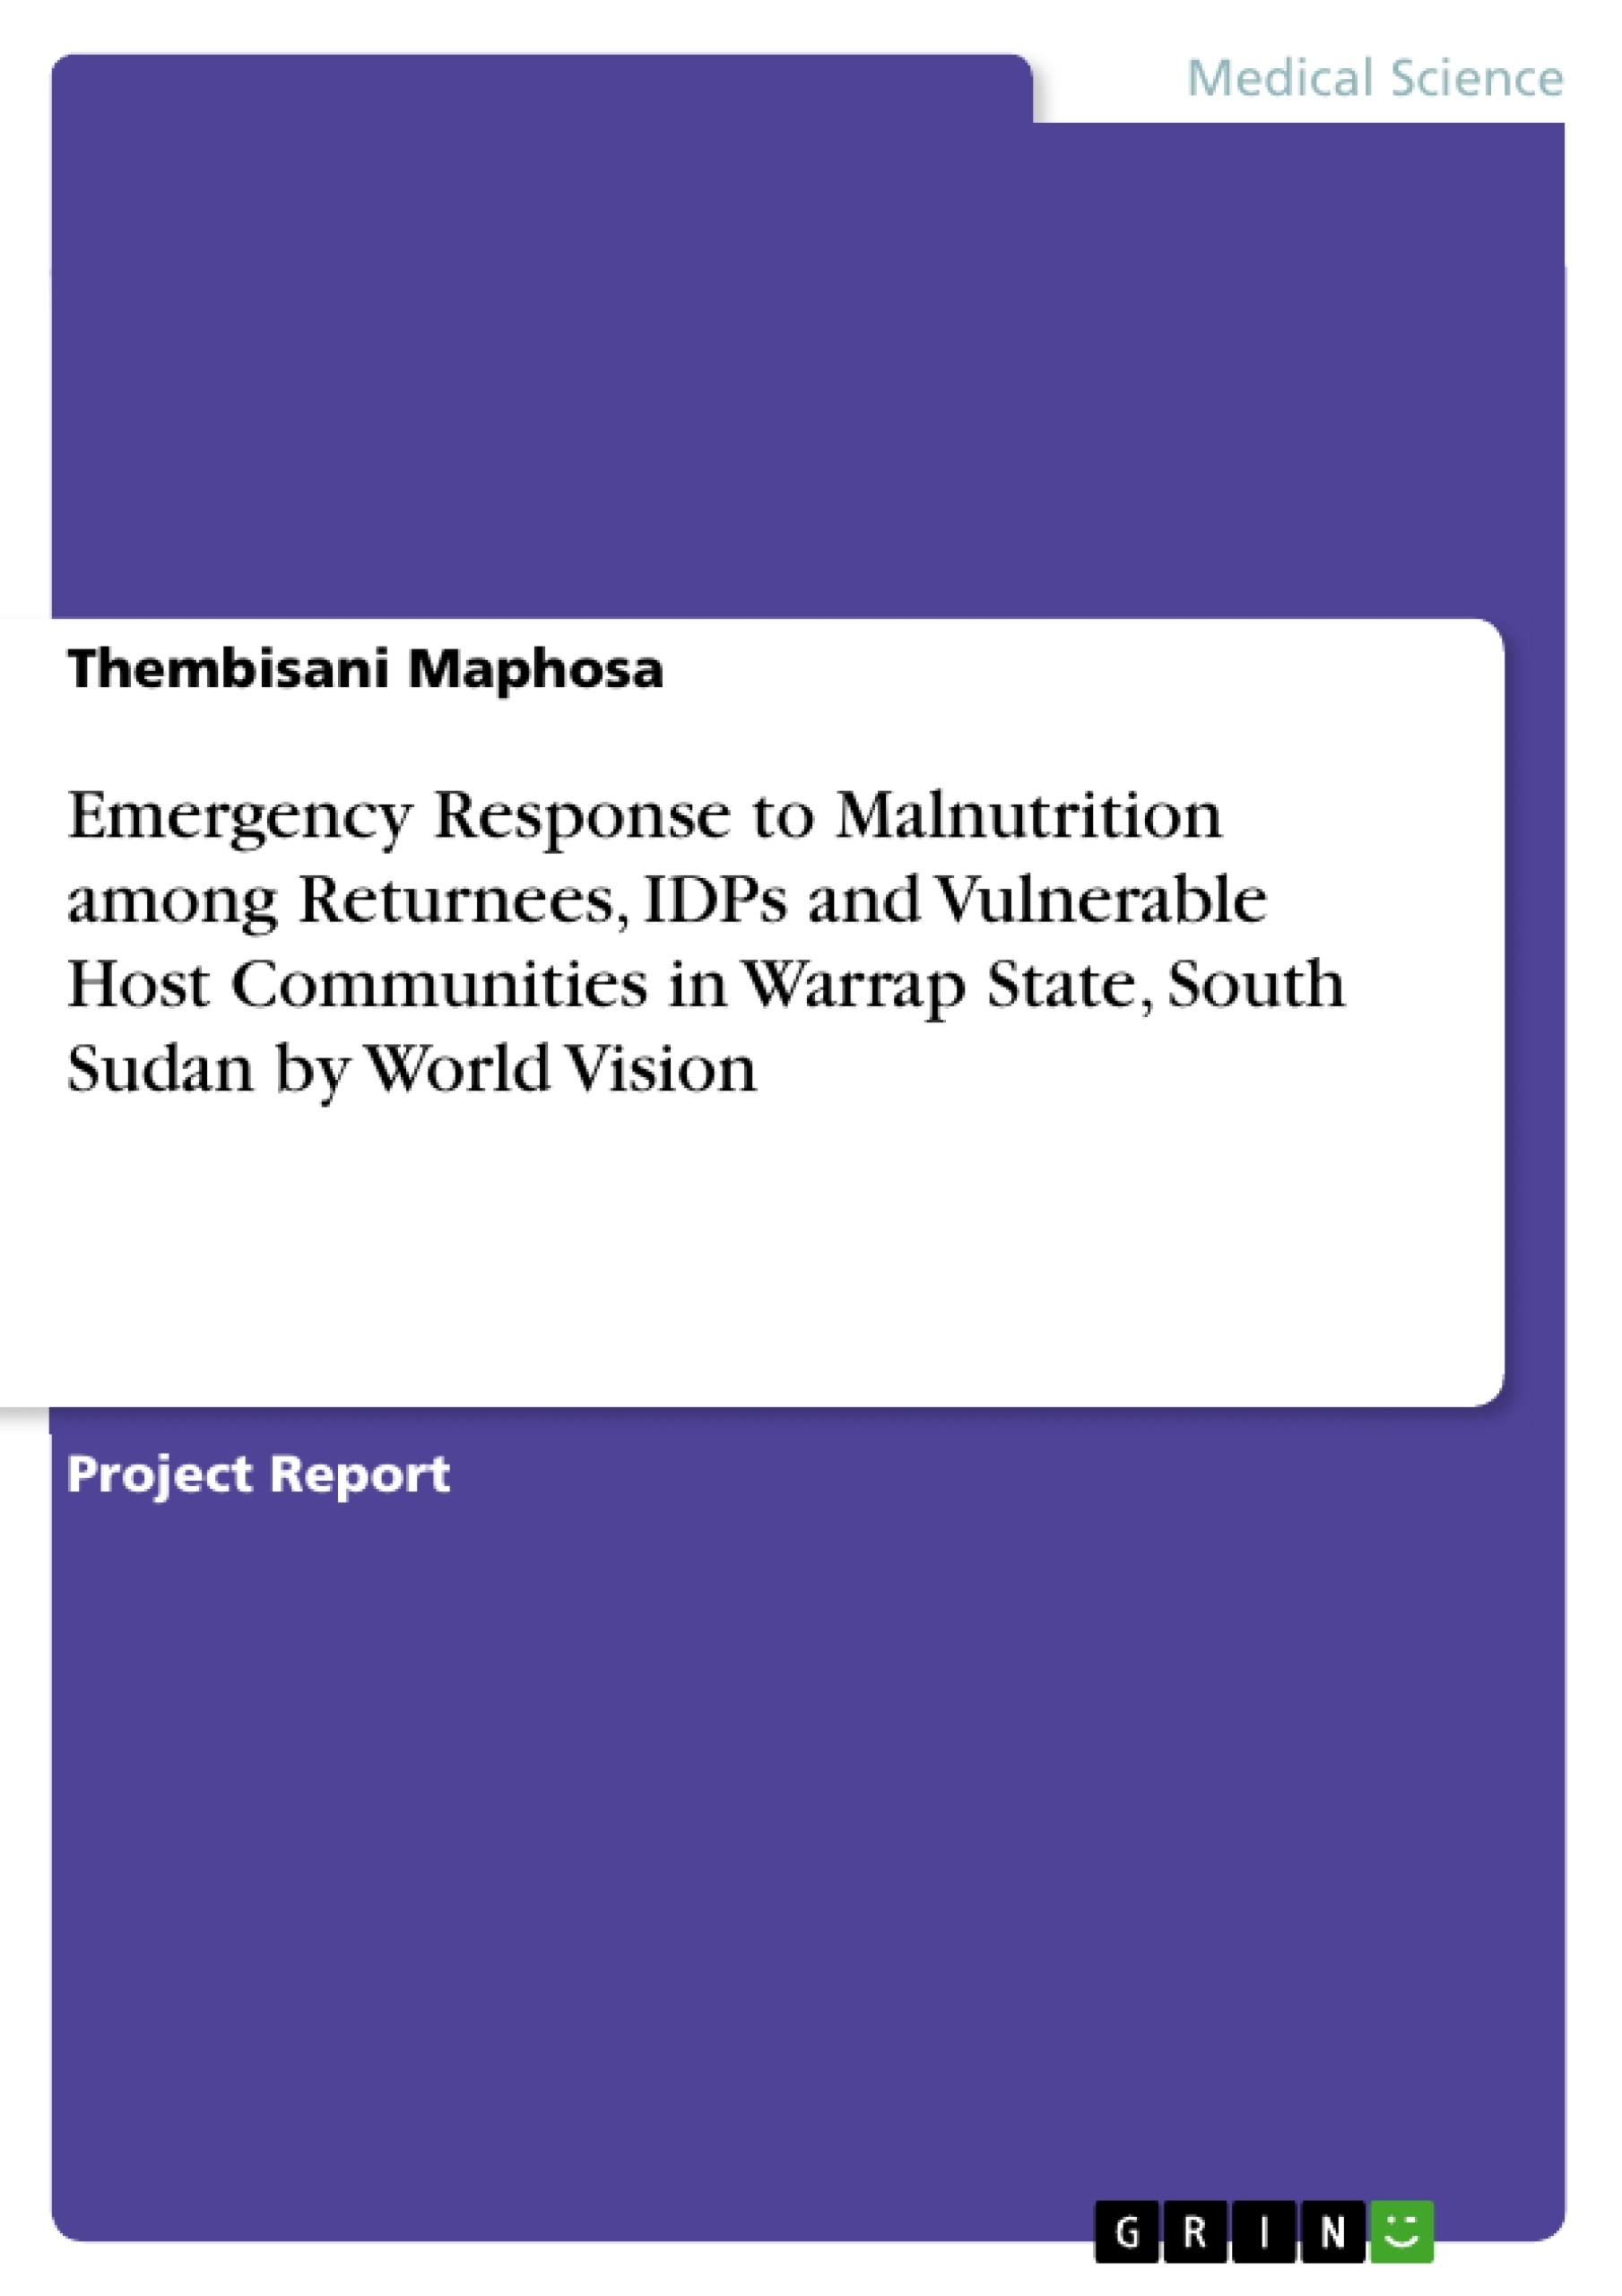 Title: Emergency Response to Malnutrition among Returnees, IDPs and Vulnerable Host Communities in Warrap State, South Sudan by World Vision